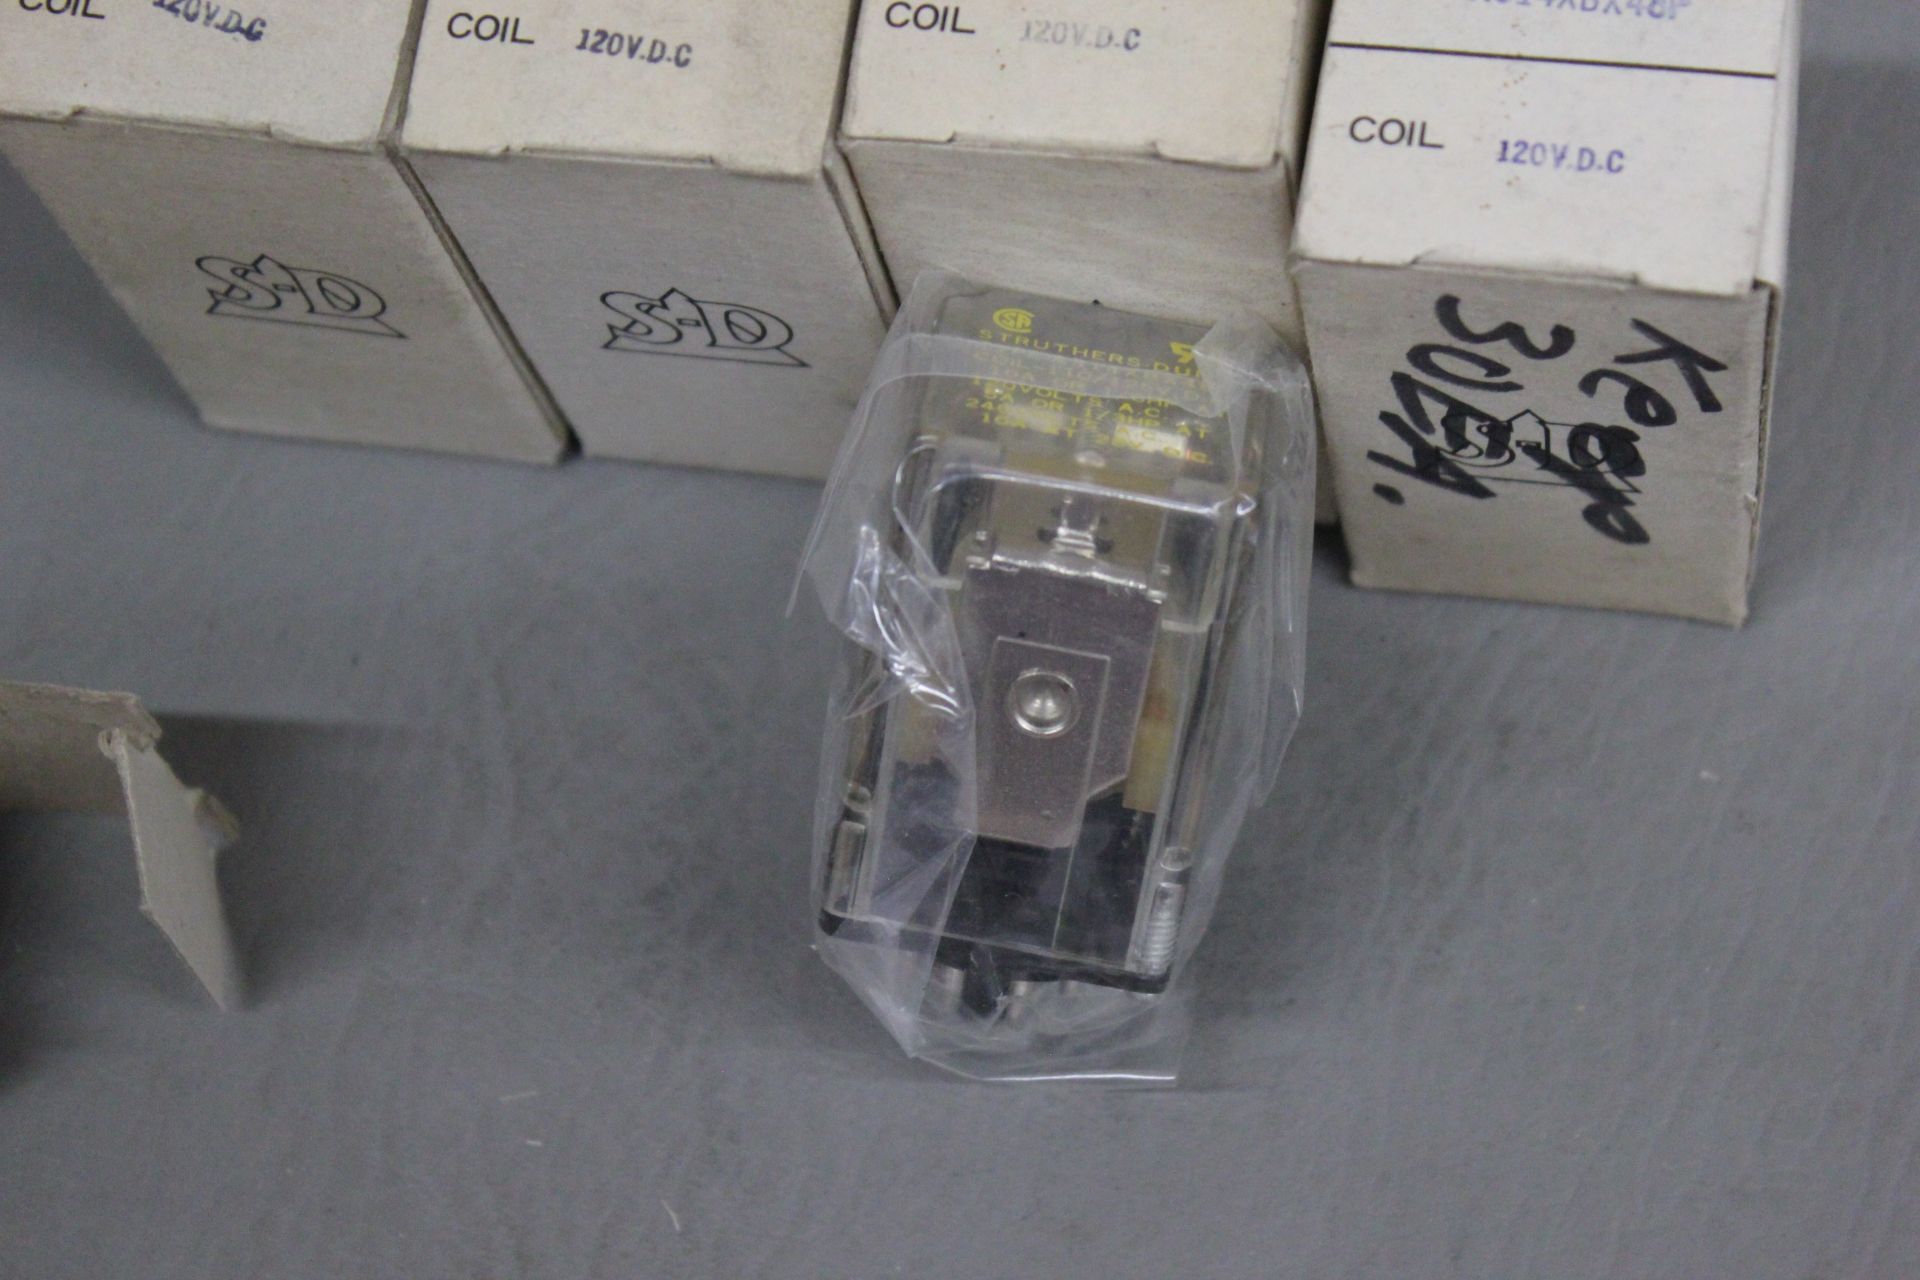 LOT OF NEW STRUTHERS DUNN 120VDC RELAYS - Image 4 of 6